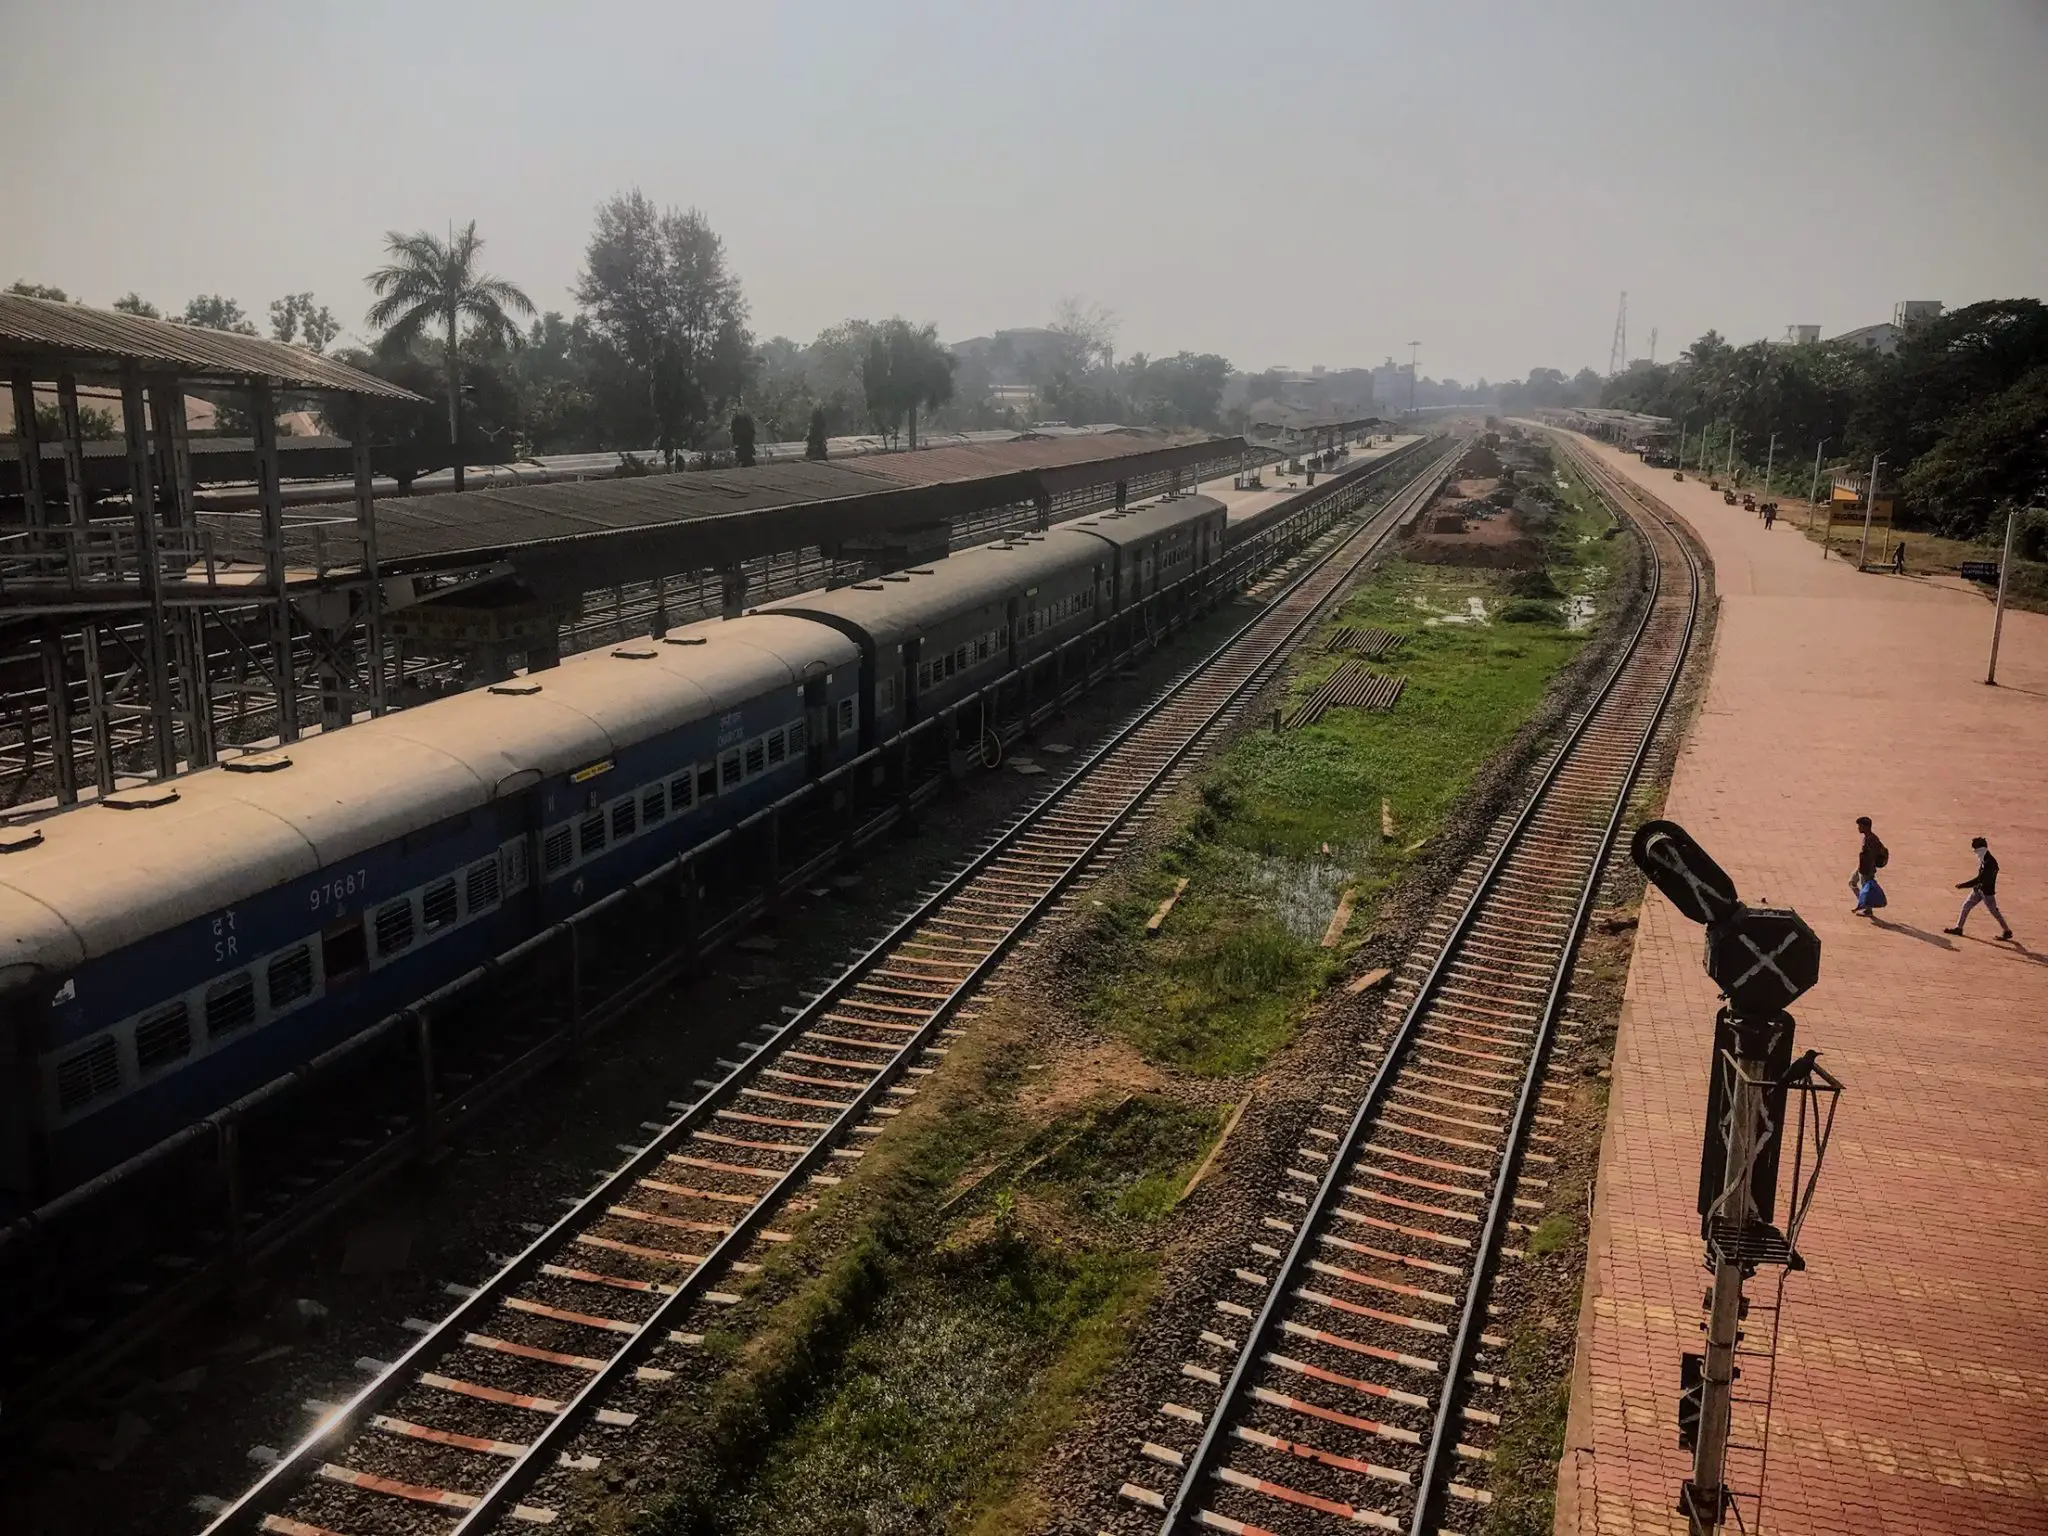 Train station in India